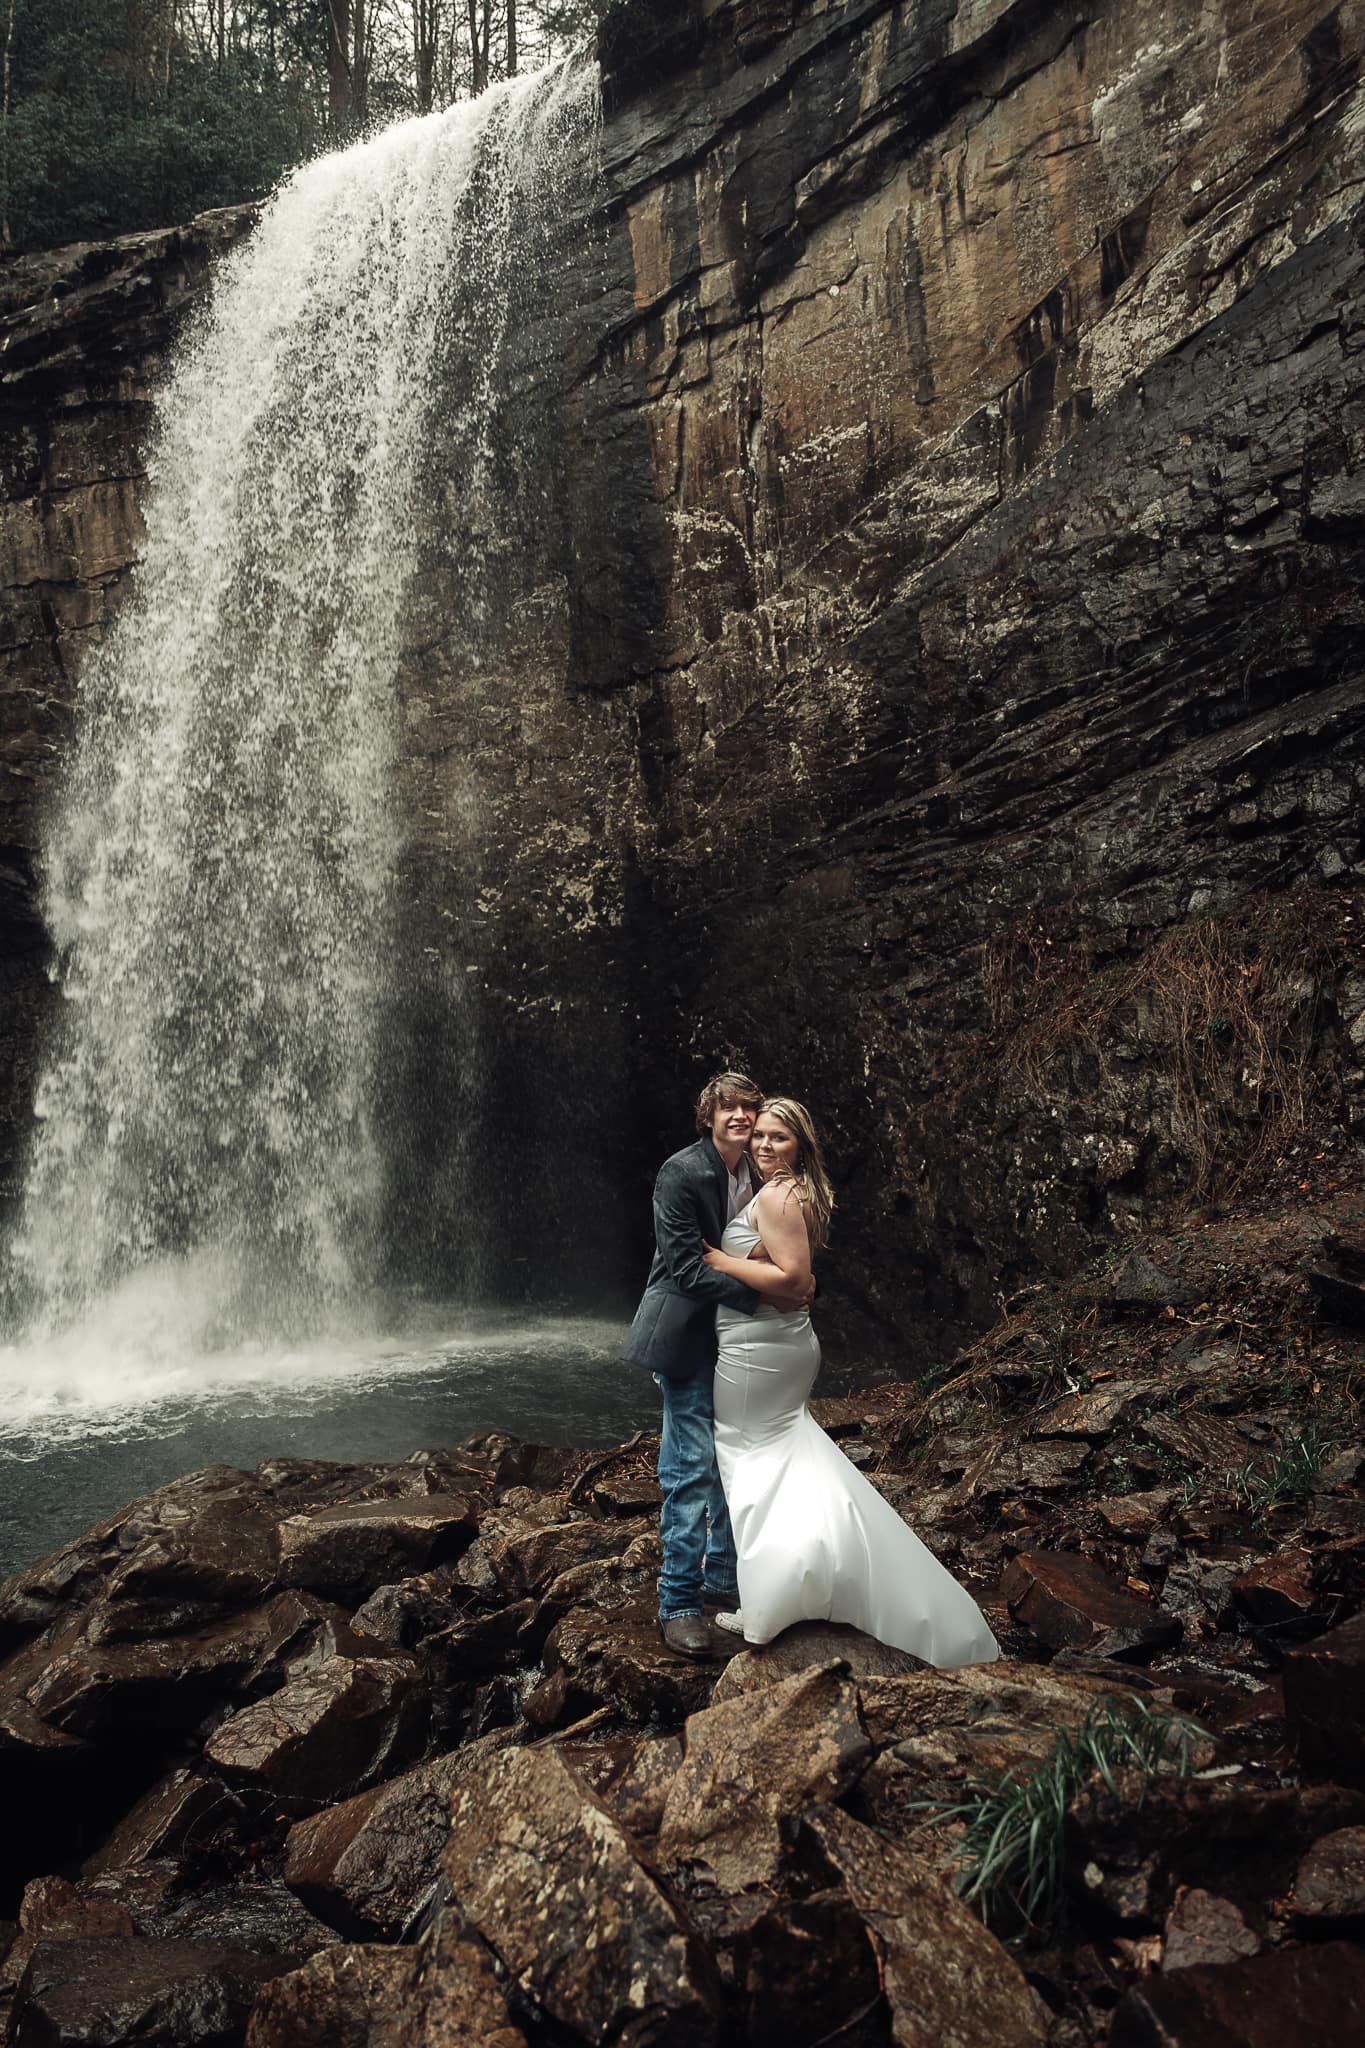 Bride and Groom embrace in a kiss with waterfall to the side of them.